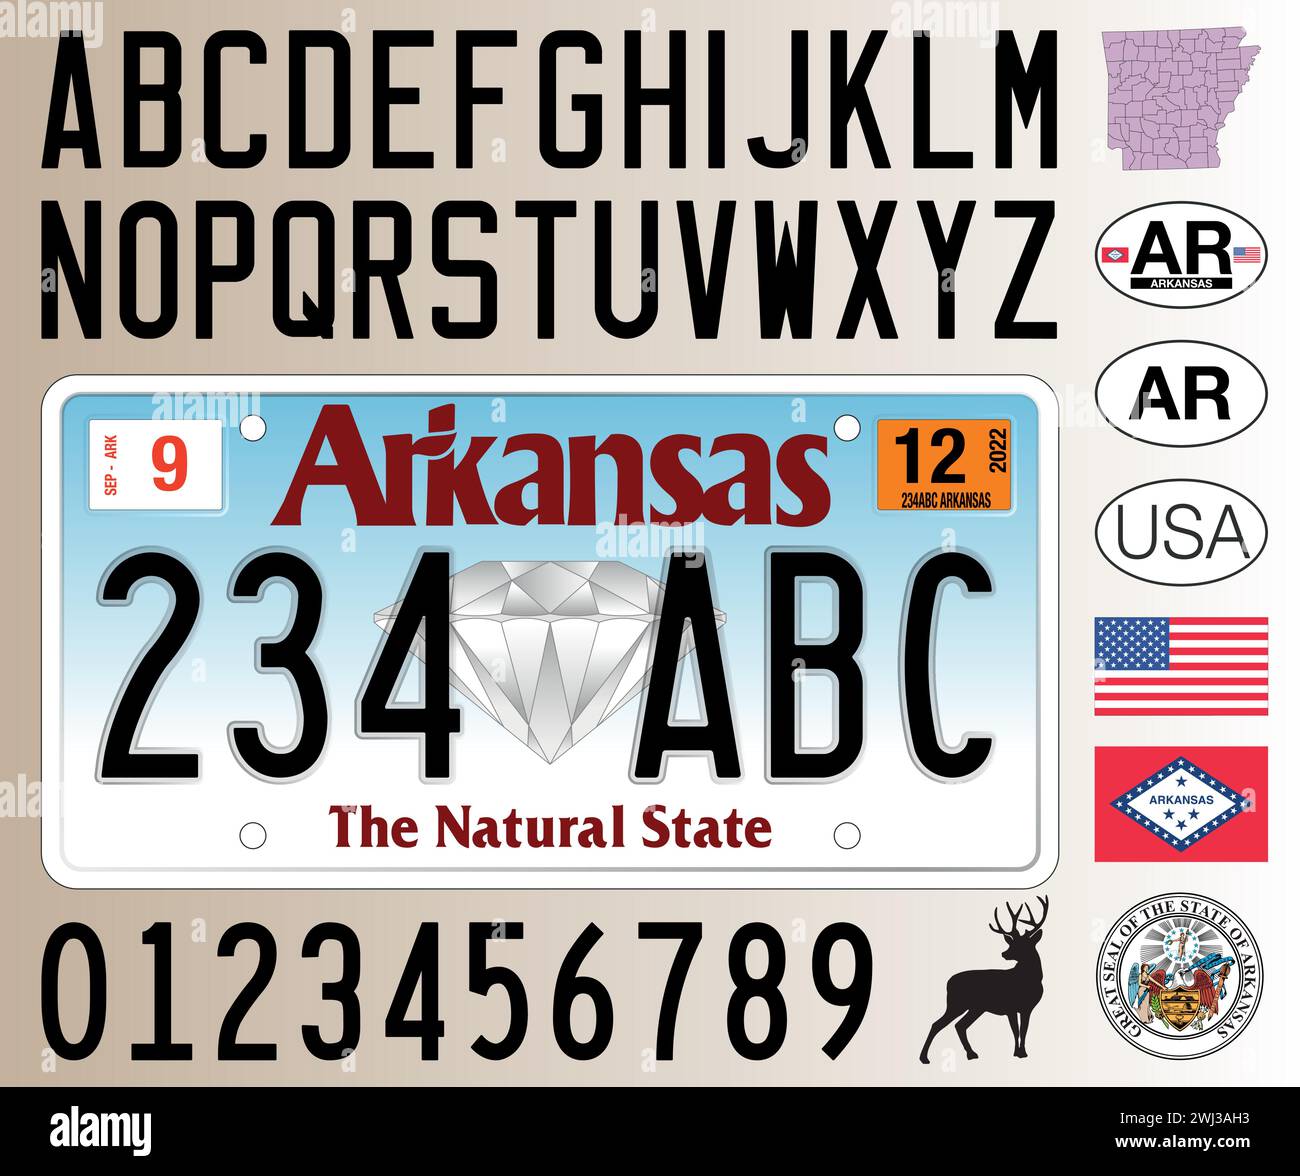 Arkansas car license plate pattern, letters, numbers and symbols, vector illustration, USA Stock Vector